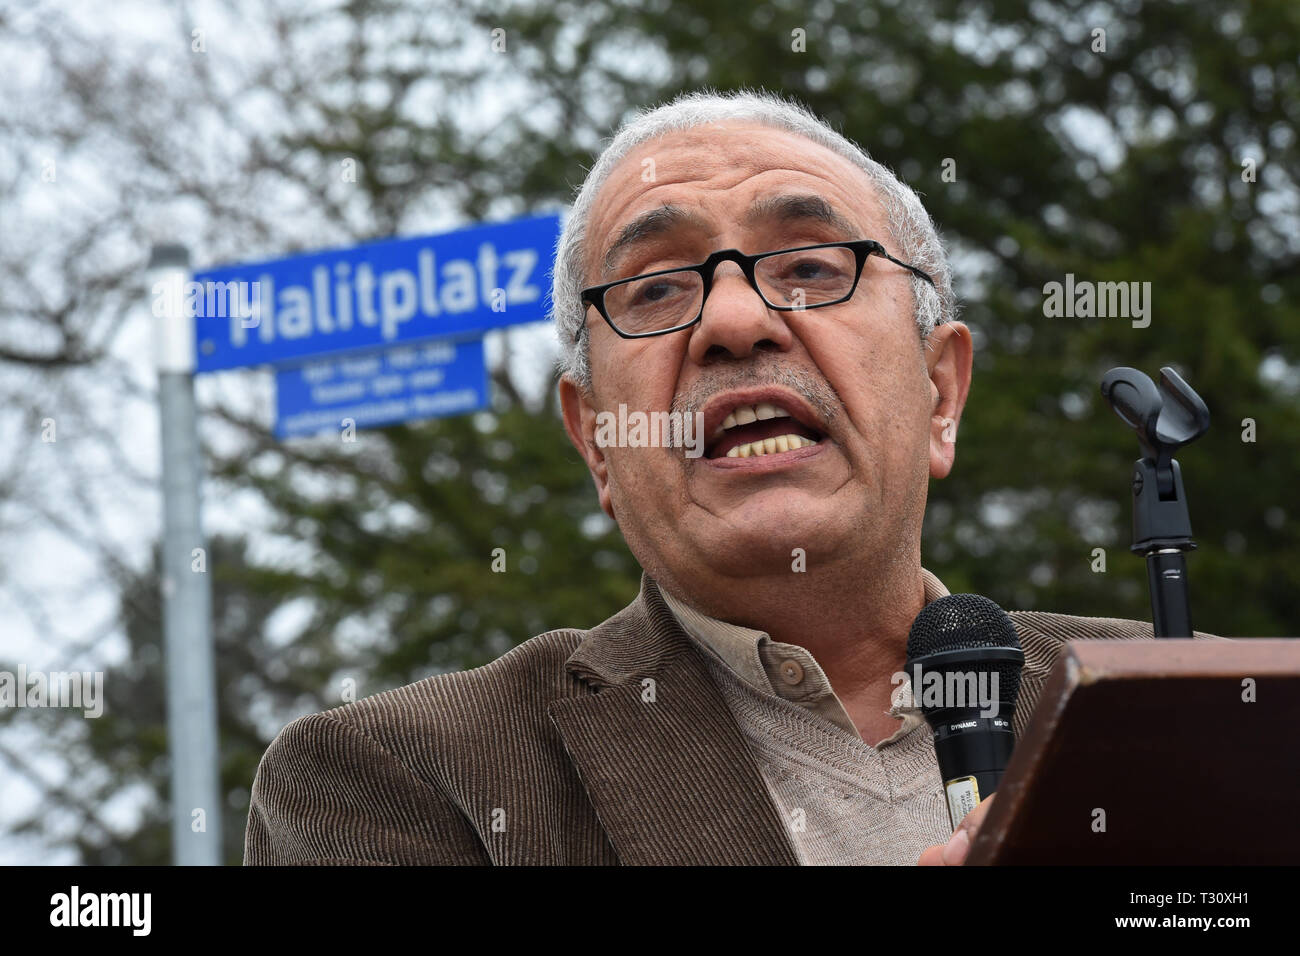 Kassel, Germany. 05th Apr, 2019. Ismail Yozgat speaks at the commemoration ceremony for his son Halit, who was murdered in 2006. The Turkish-born Internet café owner had presumably been killed by the right-wing terrorist group NSU (National Socialist Underground). Credit: Uwe Zucchi/dpa/Alamy Live News Stock Photo